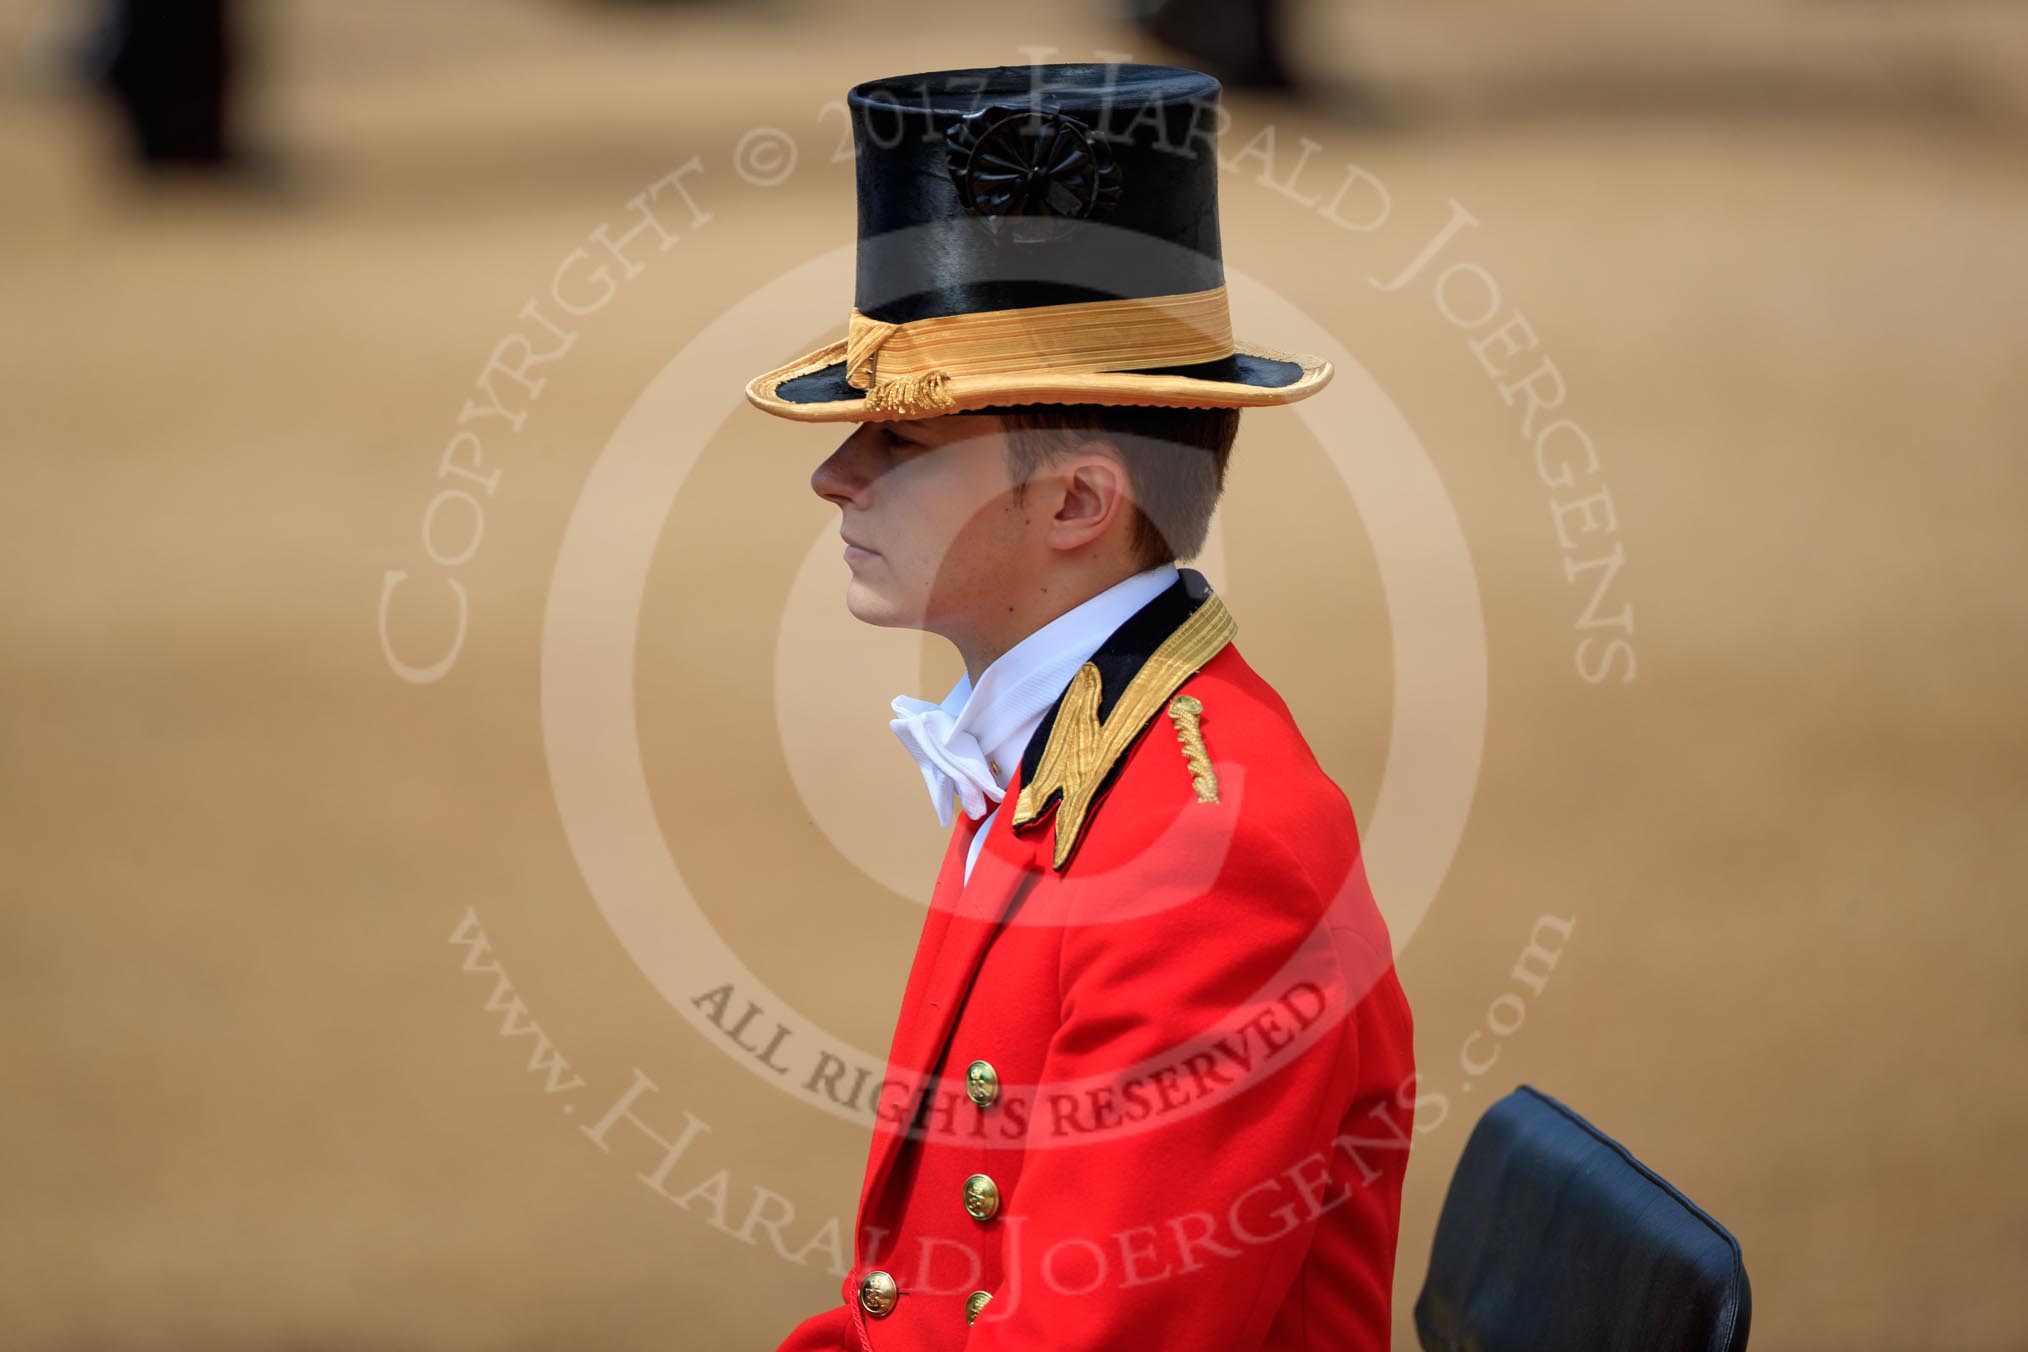 during The Colonel's Review {iptcyear4} (final rehearsal for Trooping the Colour, The Queen's Birthday Parade)  at Horse Guards Parade, Westminster, London, 2 June 2018, 12:13.